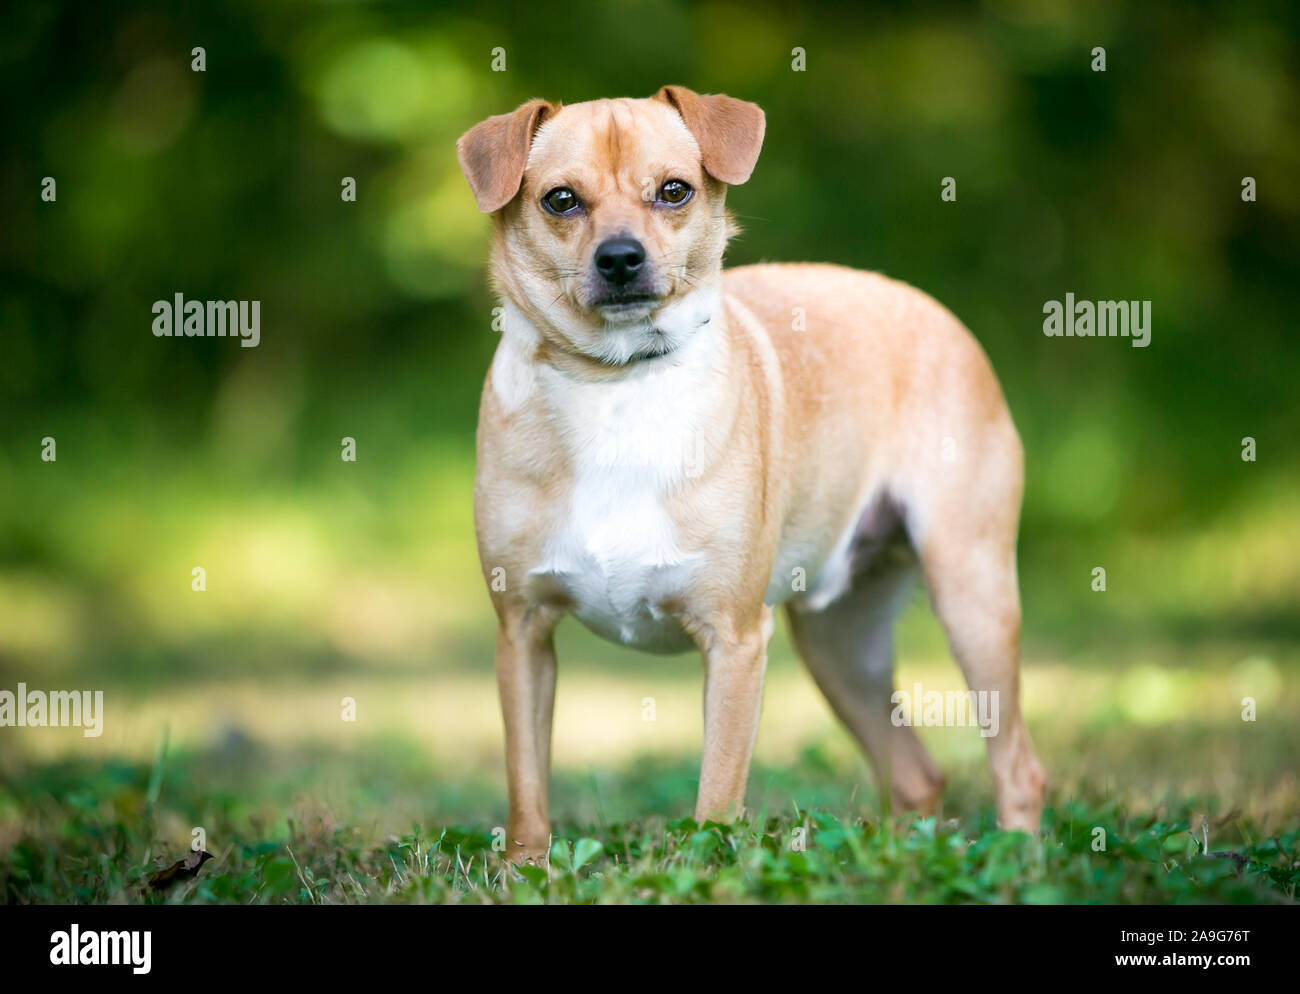 A small Terrier mixed breed dog standing outdoors Stock Photo